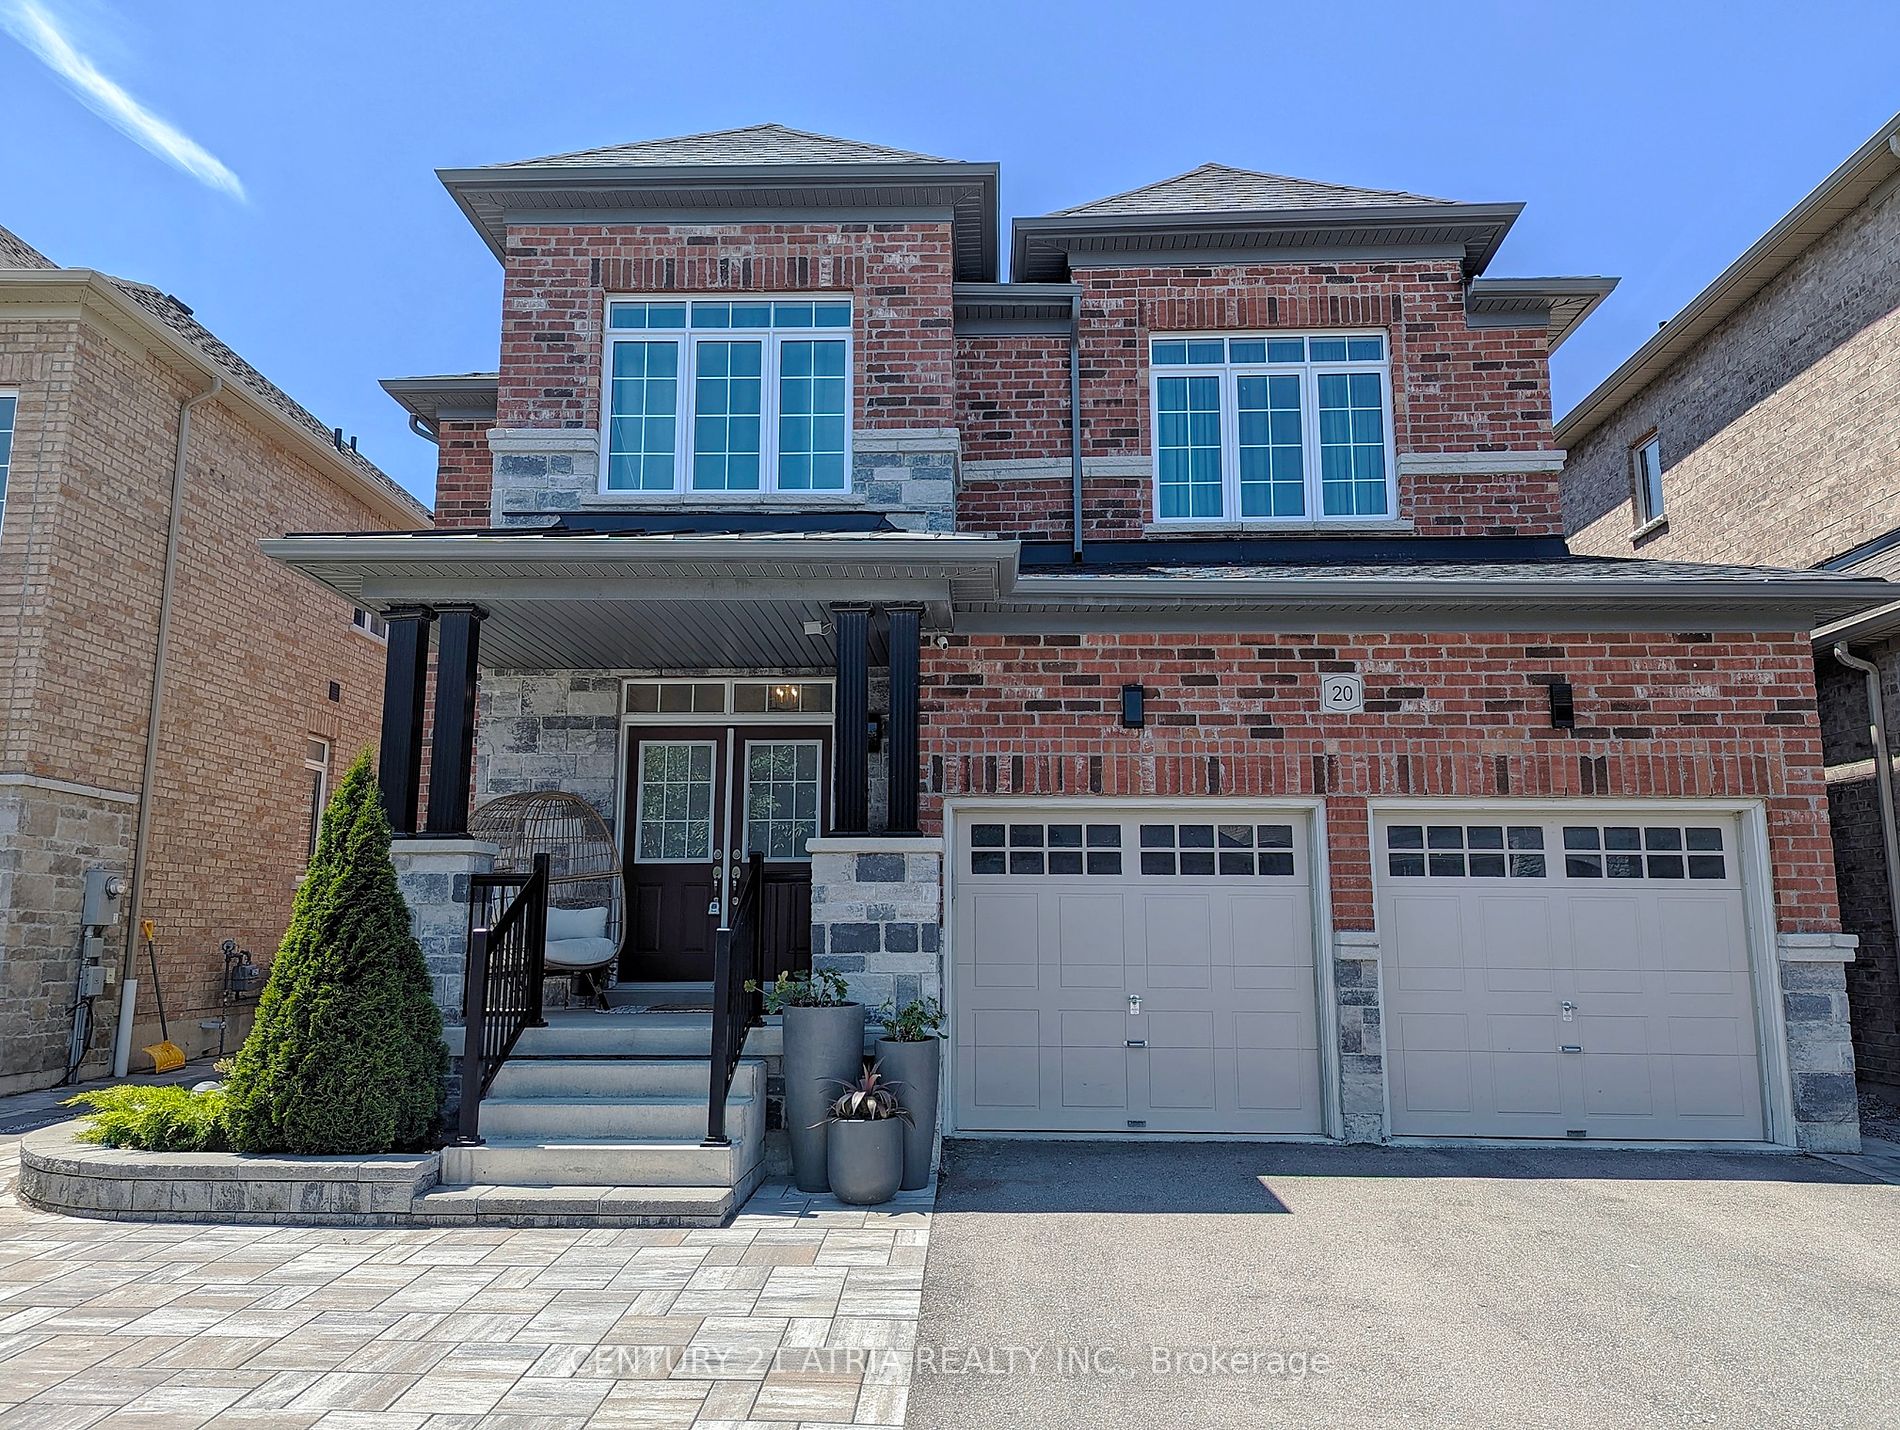 Detached house for sale at 20 Lewis Ave Bradford West Gwillimbury Ontario